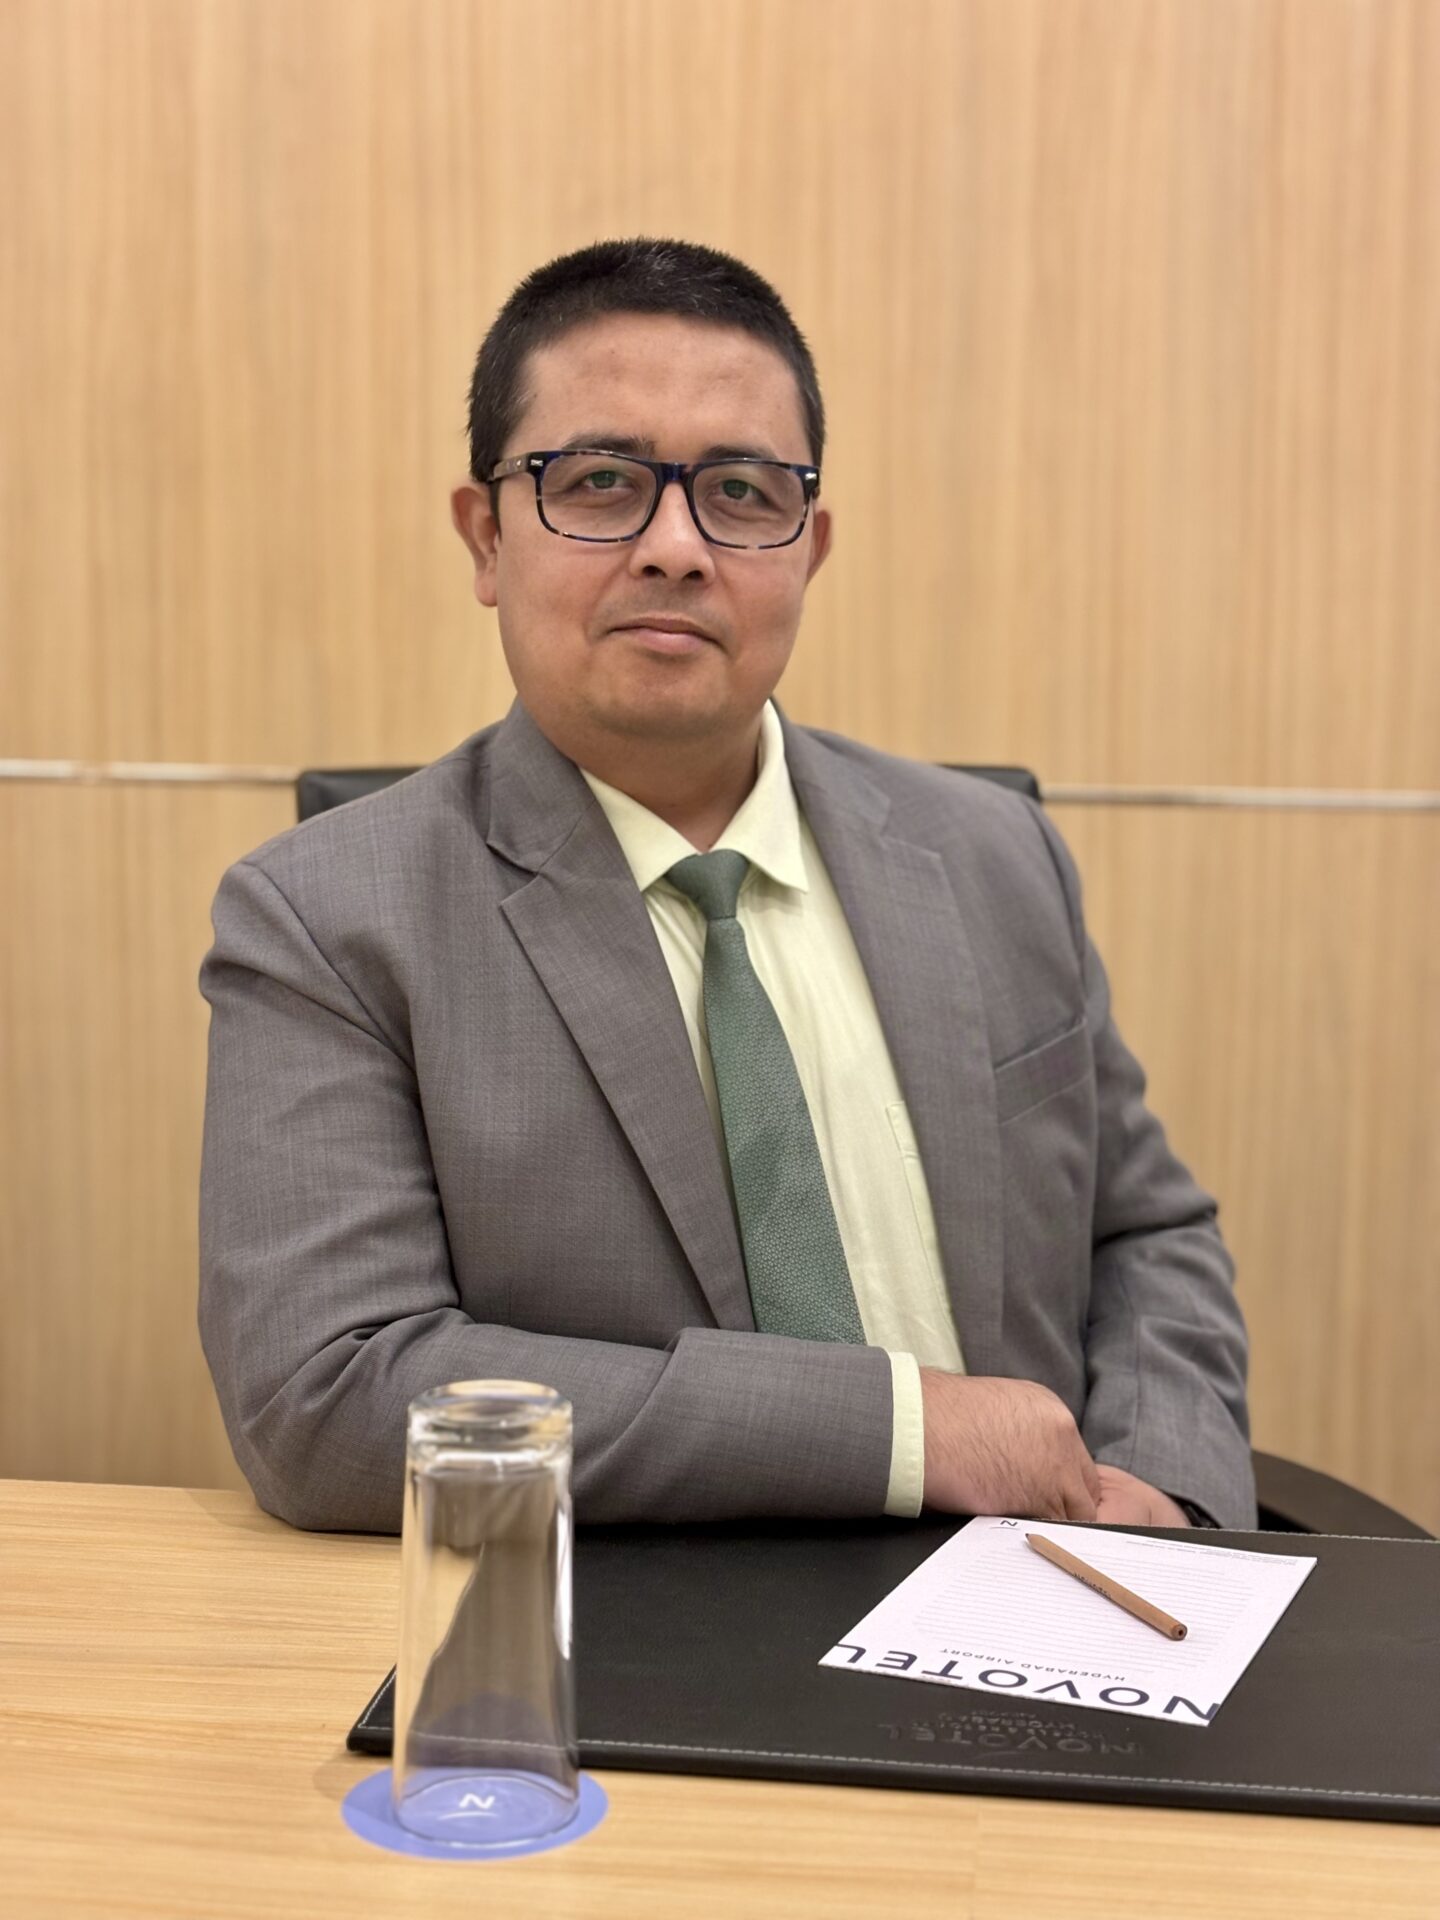 Novotel Hyderabad Airport Appoints Rahul Choudhary as its Director of Revenue